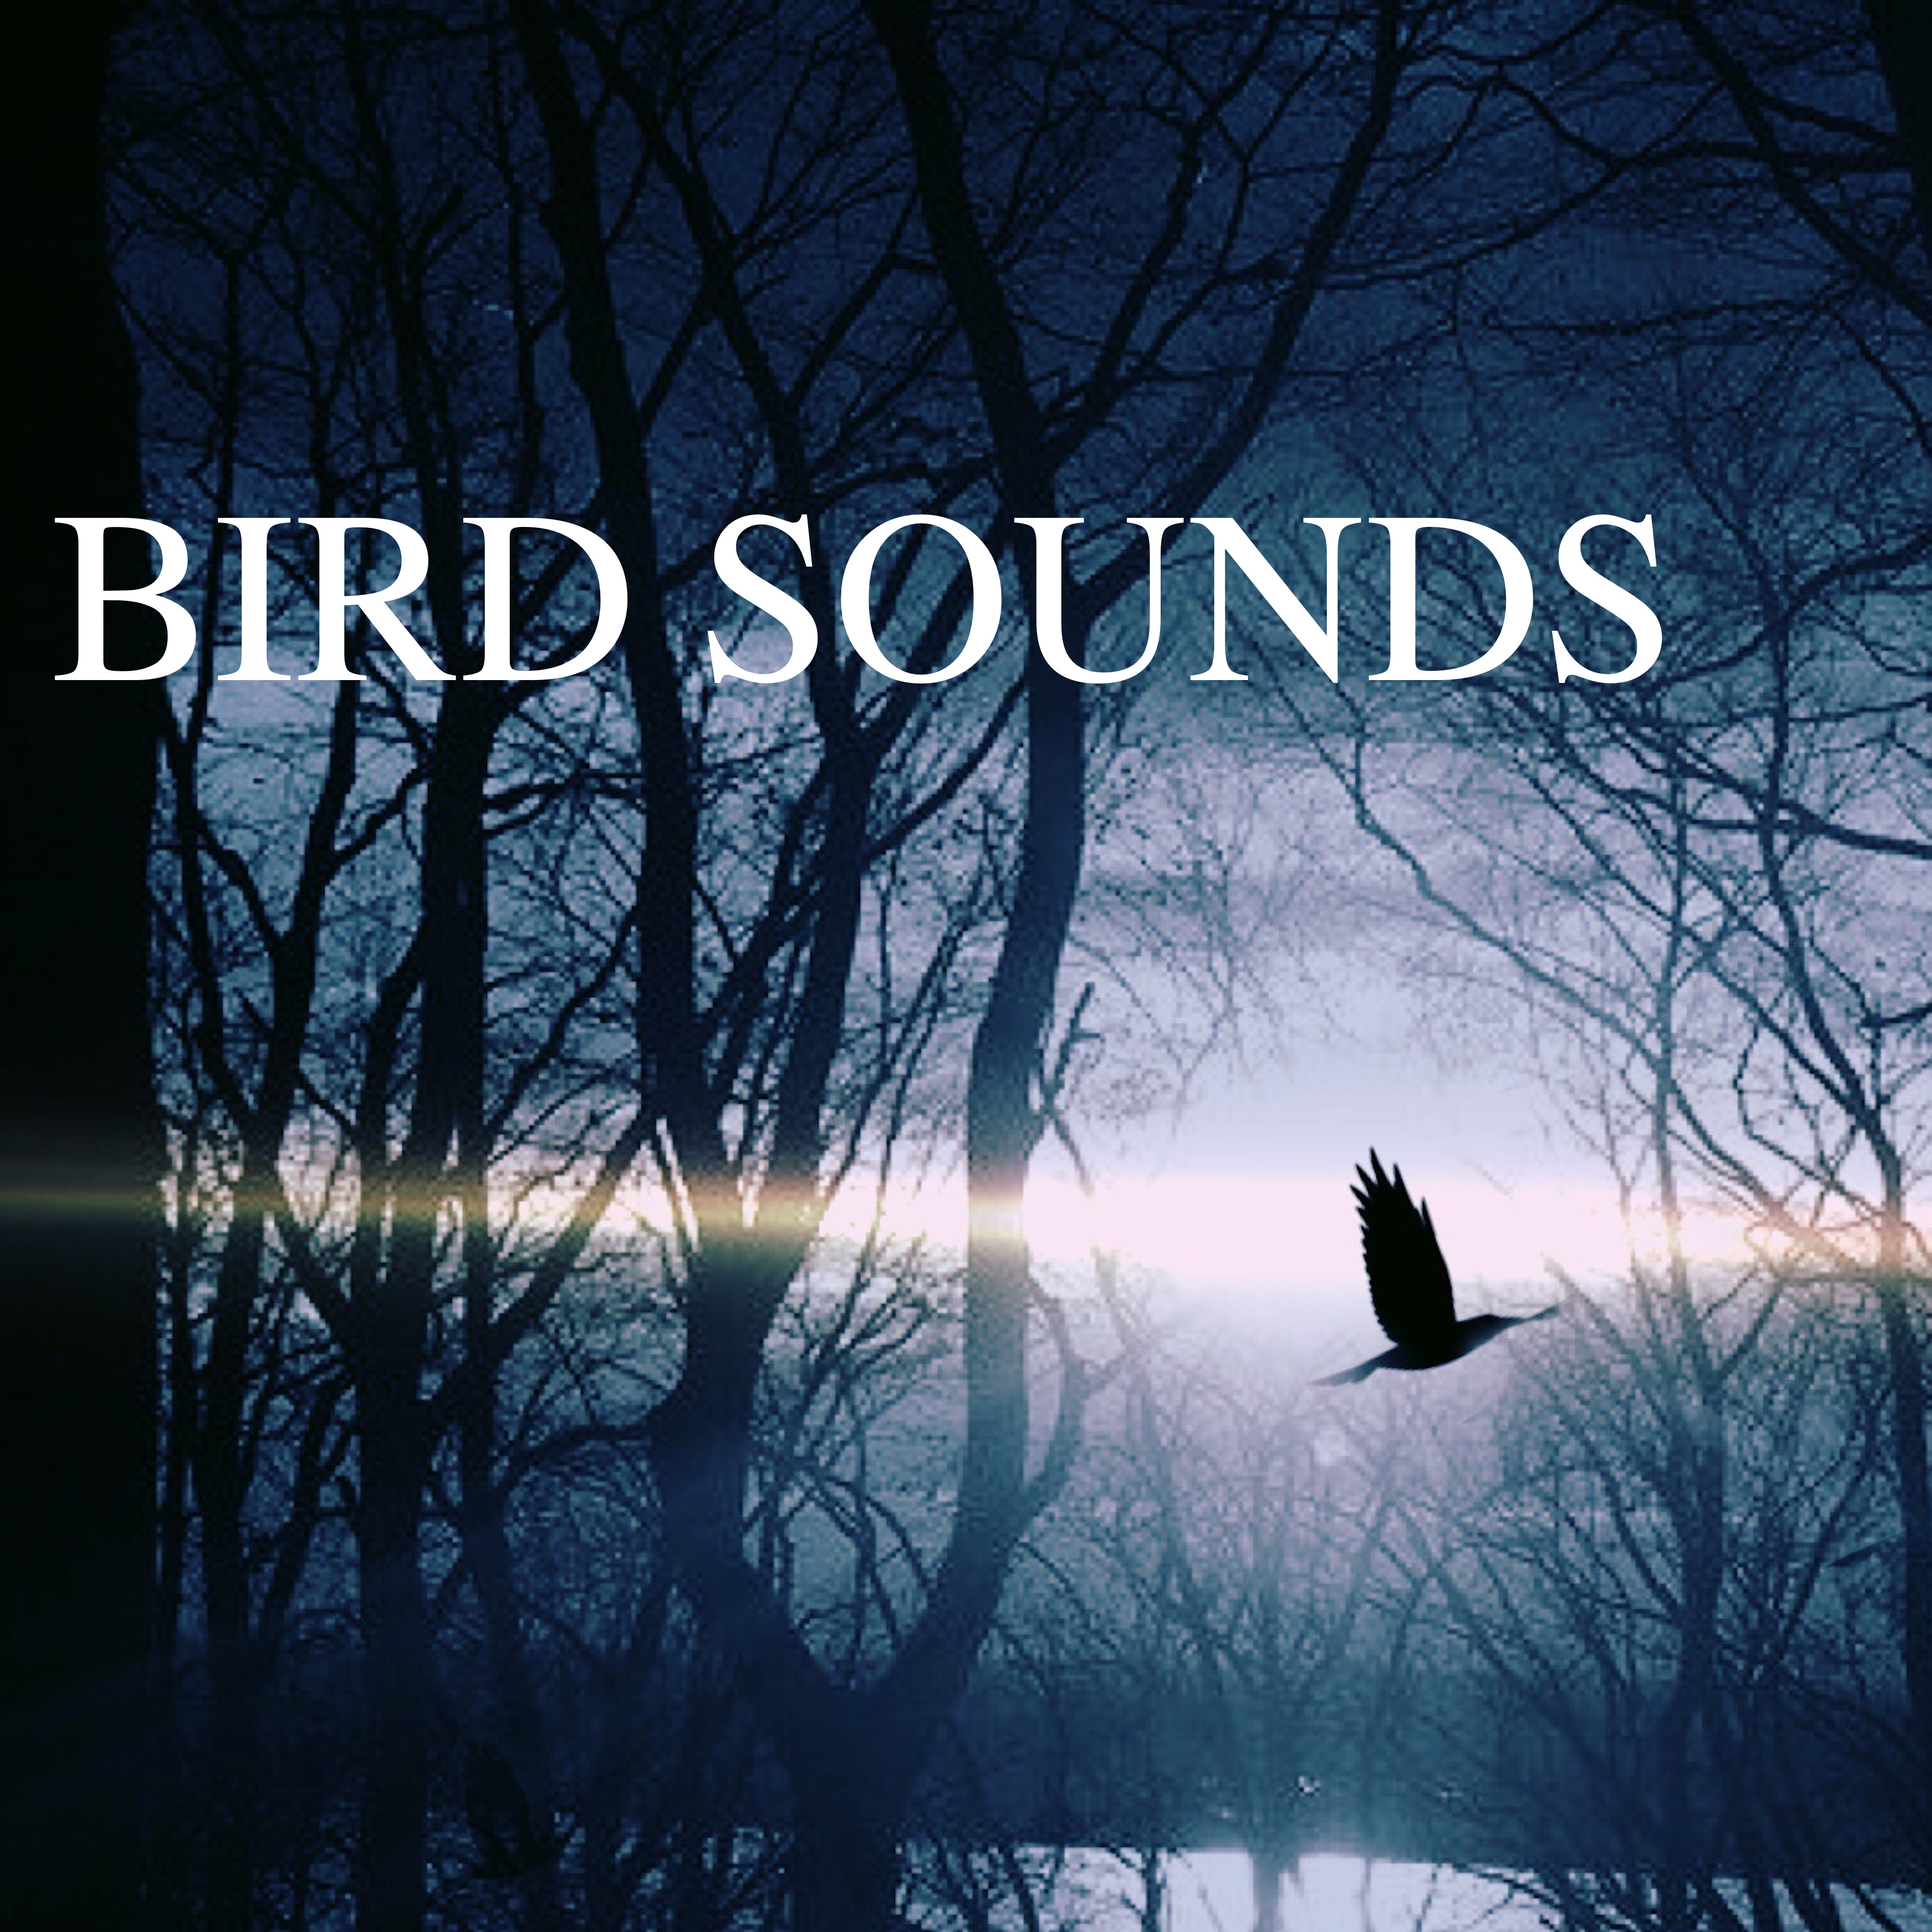 Bird Sounds  Soothing Natural Music for Deep Relaxation  Sleep, Nature Sounds with Piano and Flute